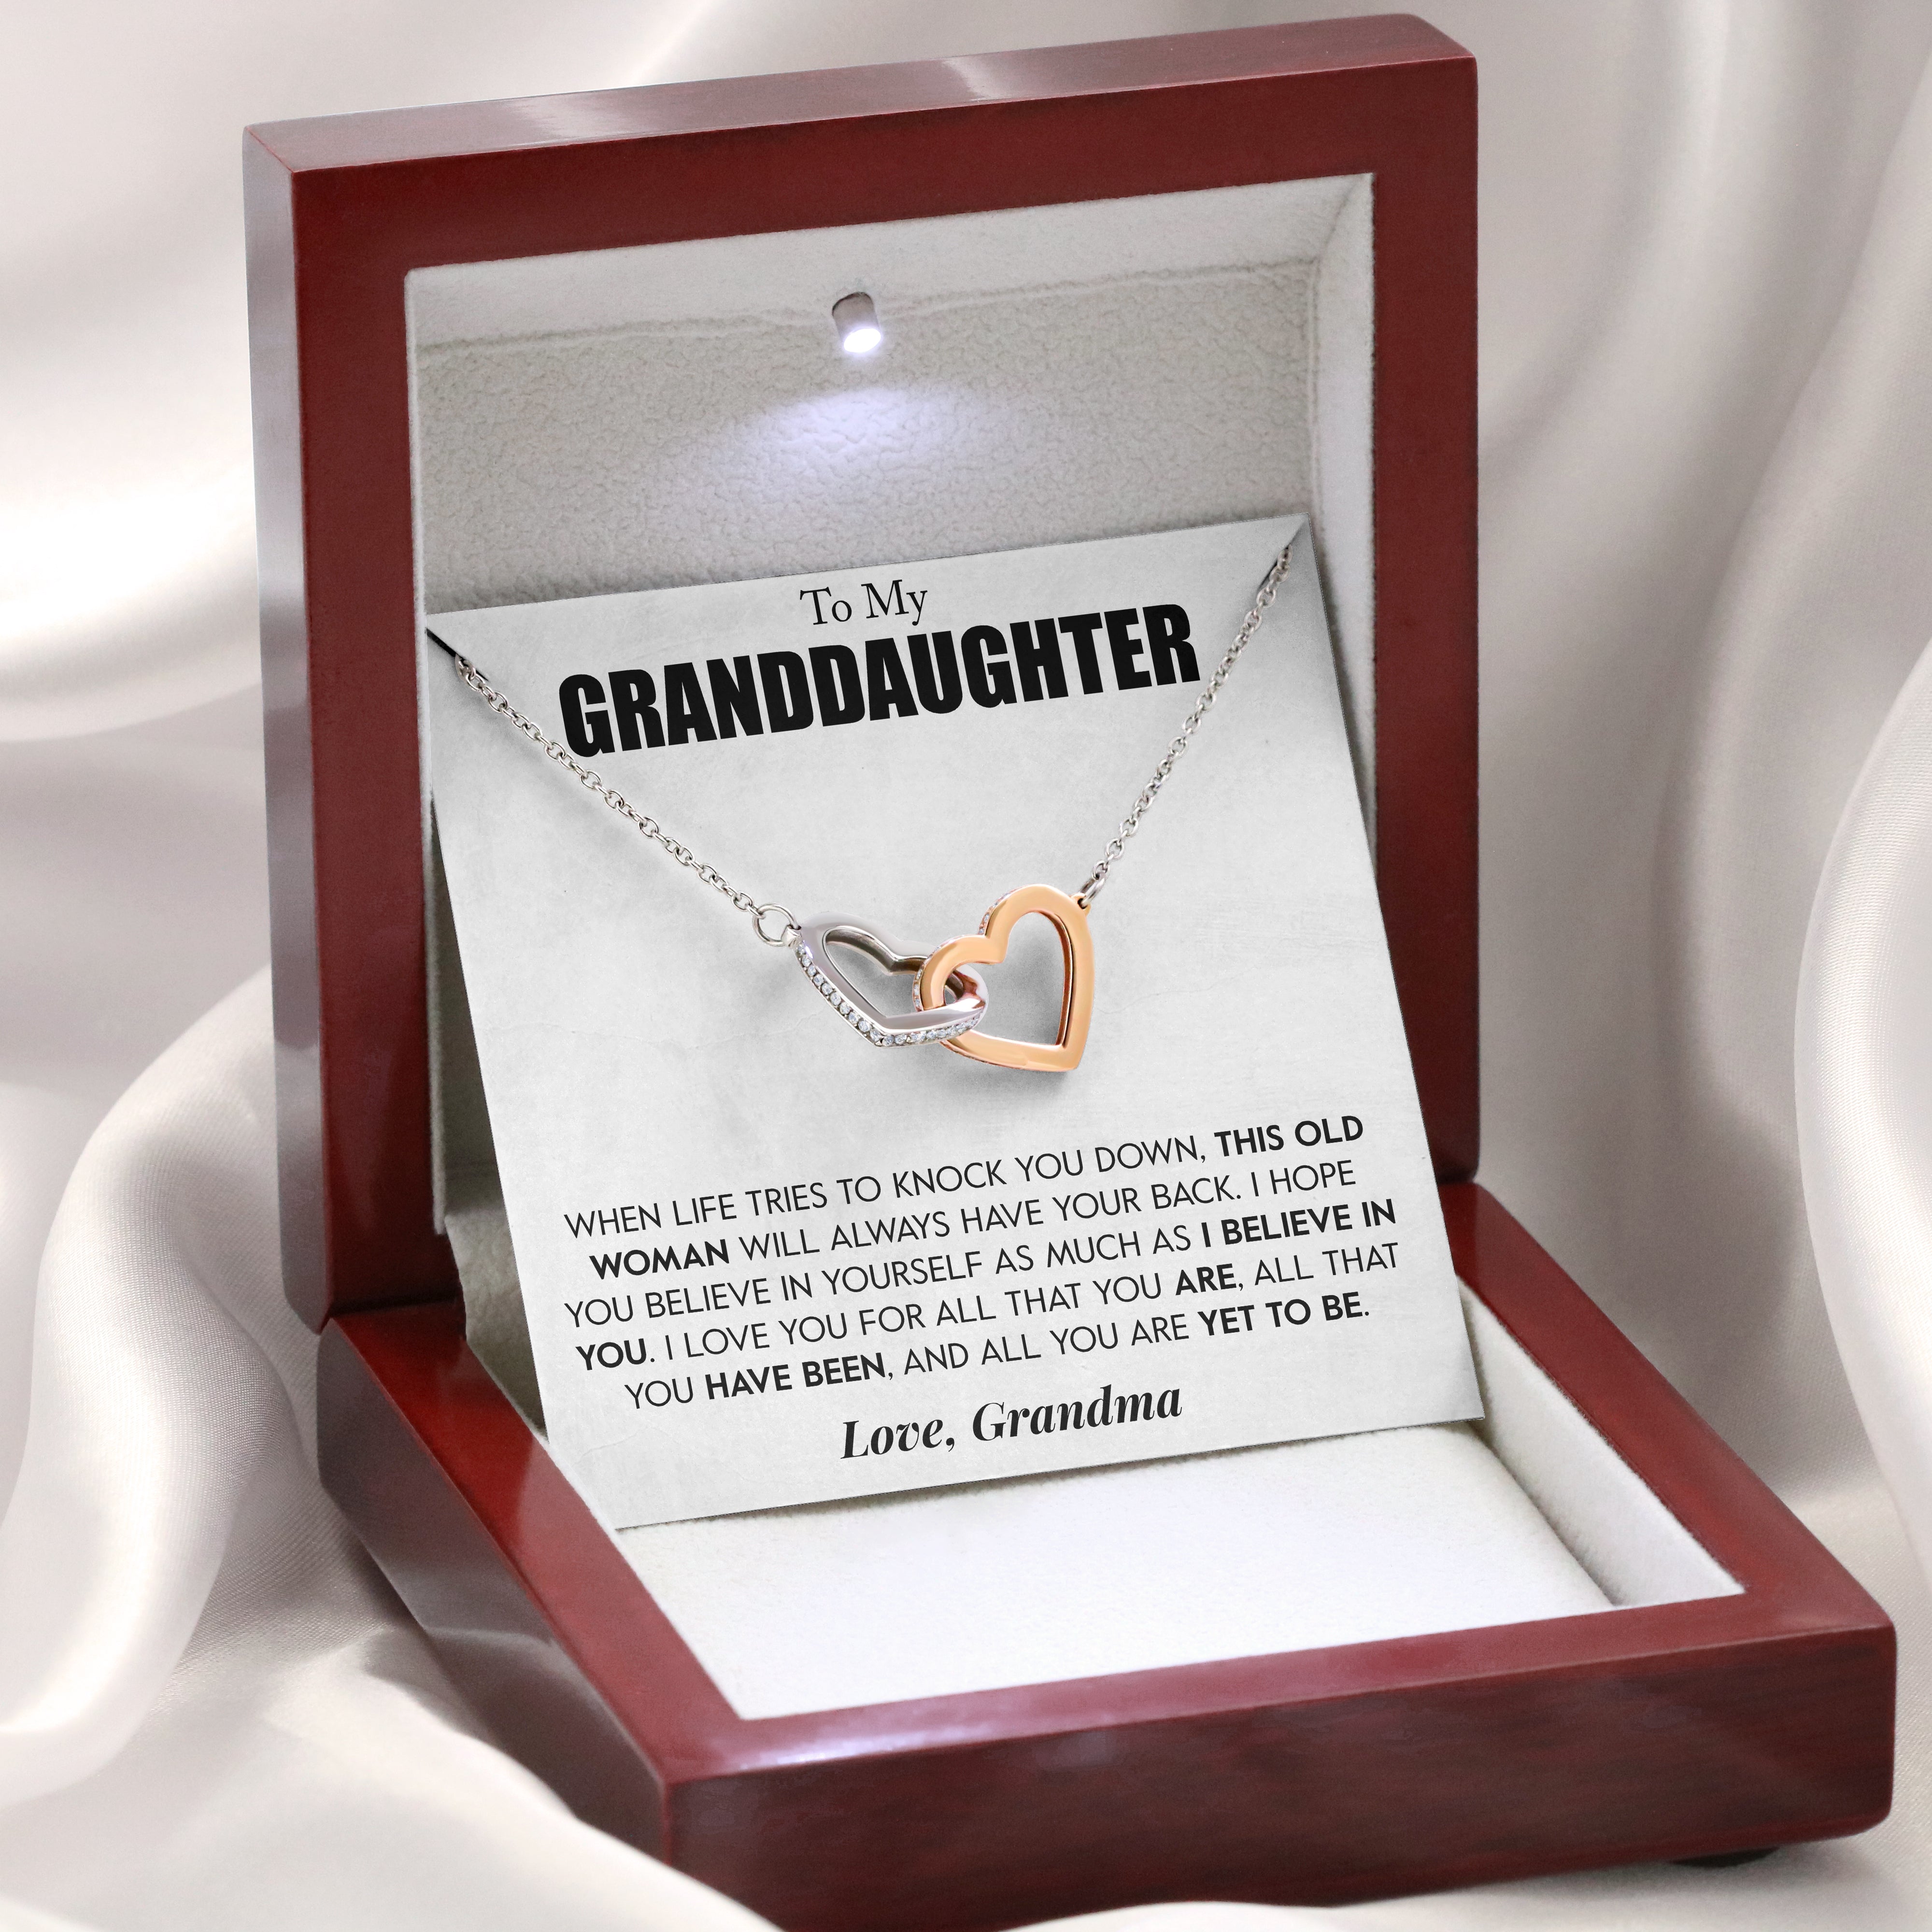 To My Granddaughter | "This Old Woman" | Interlocking Hearts Necklace